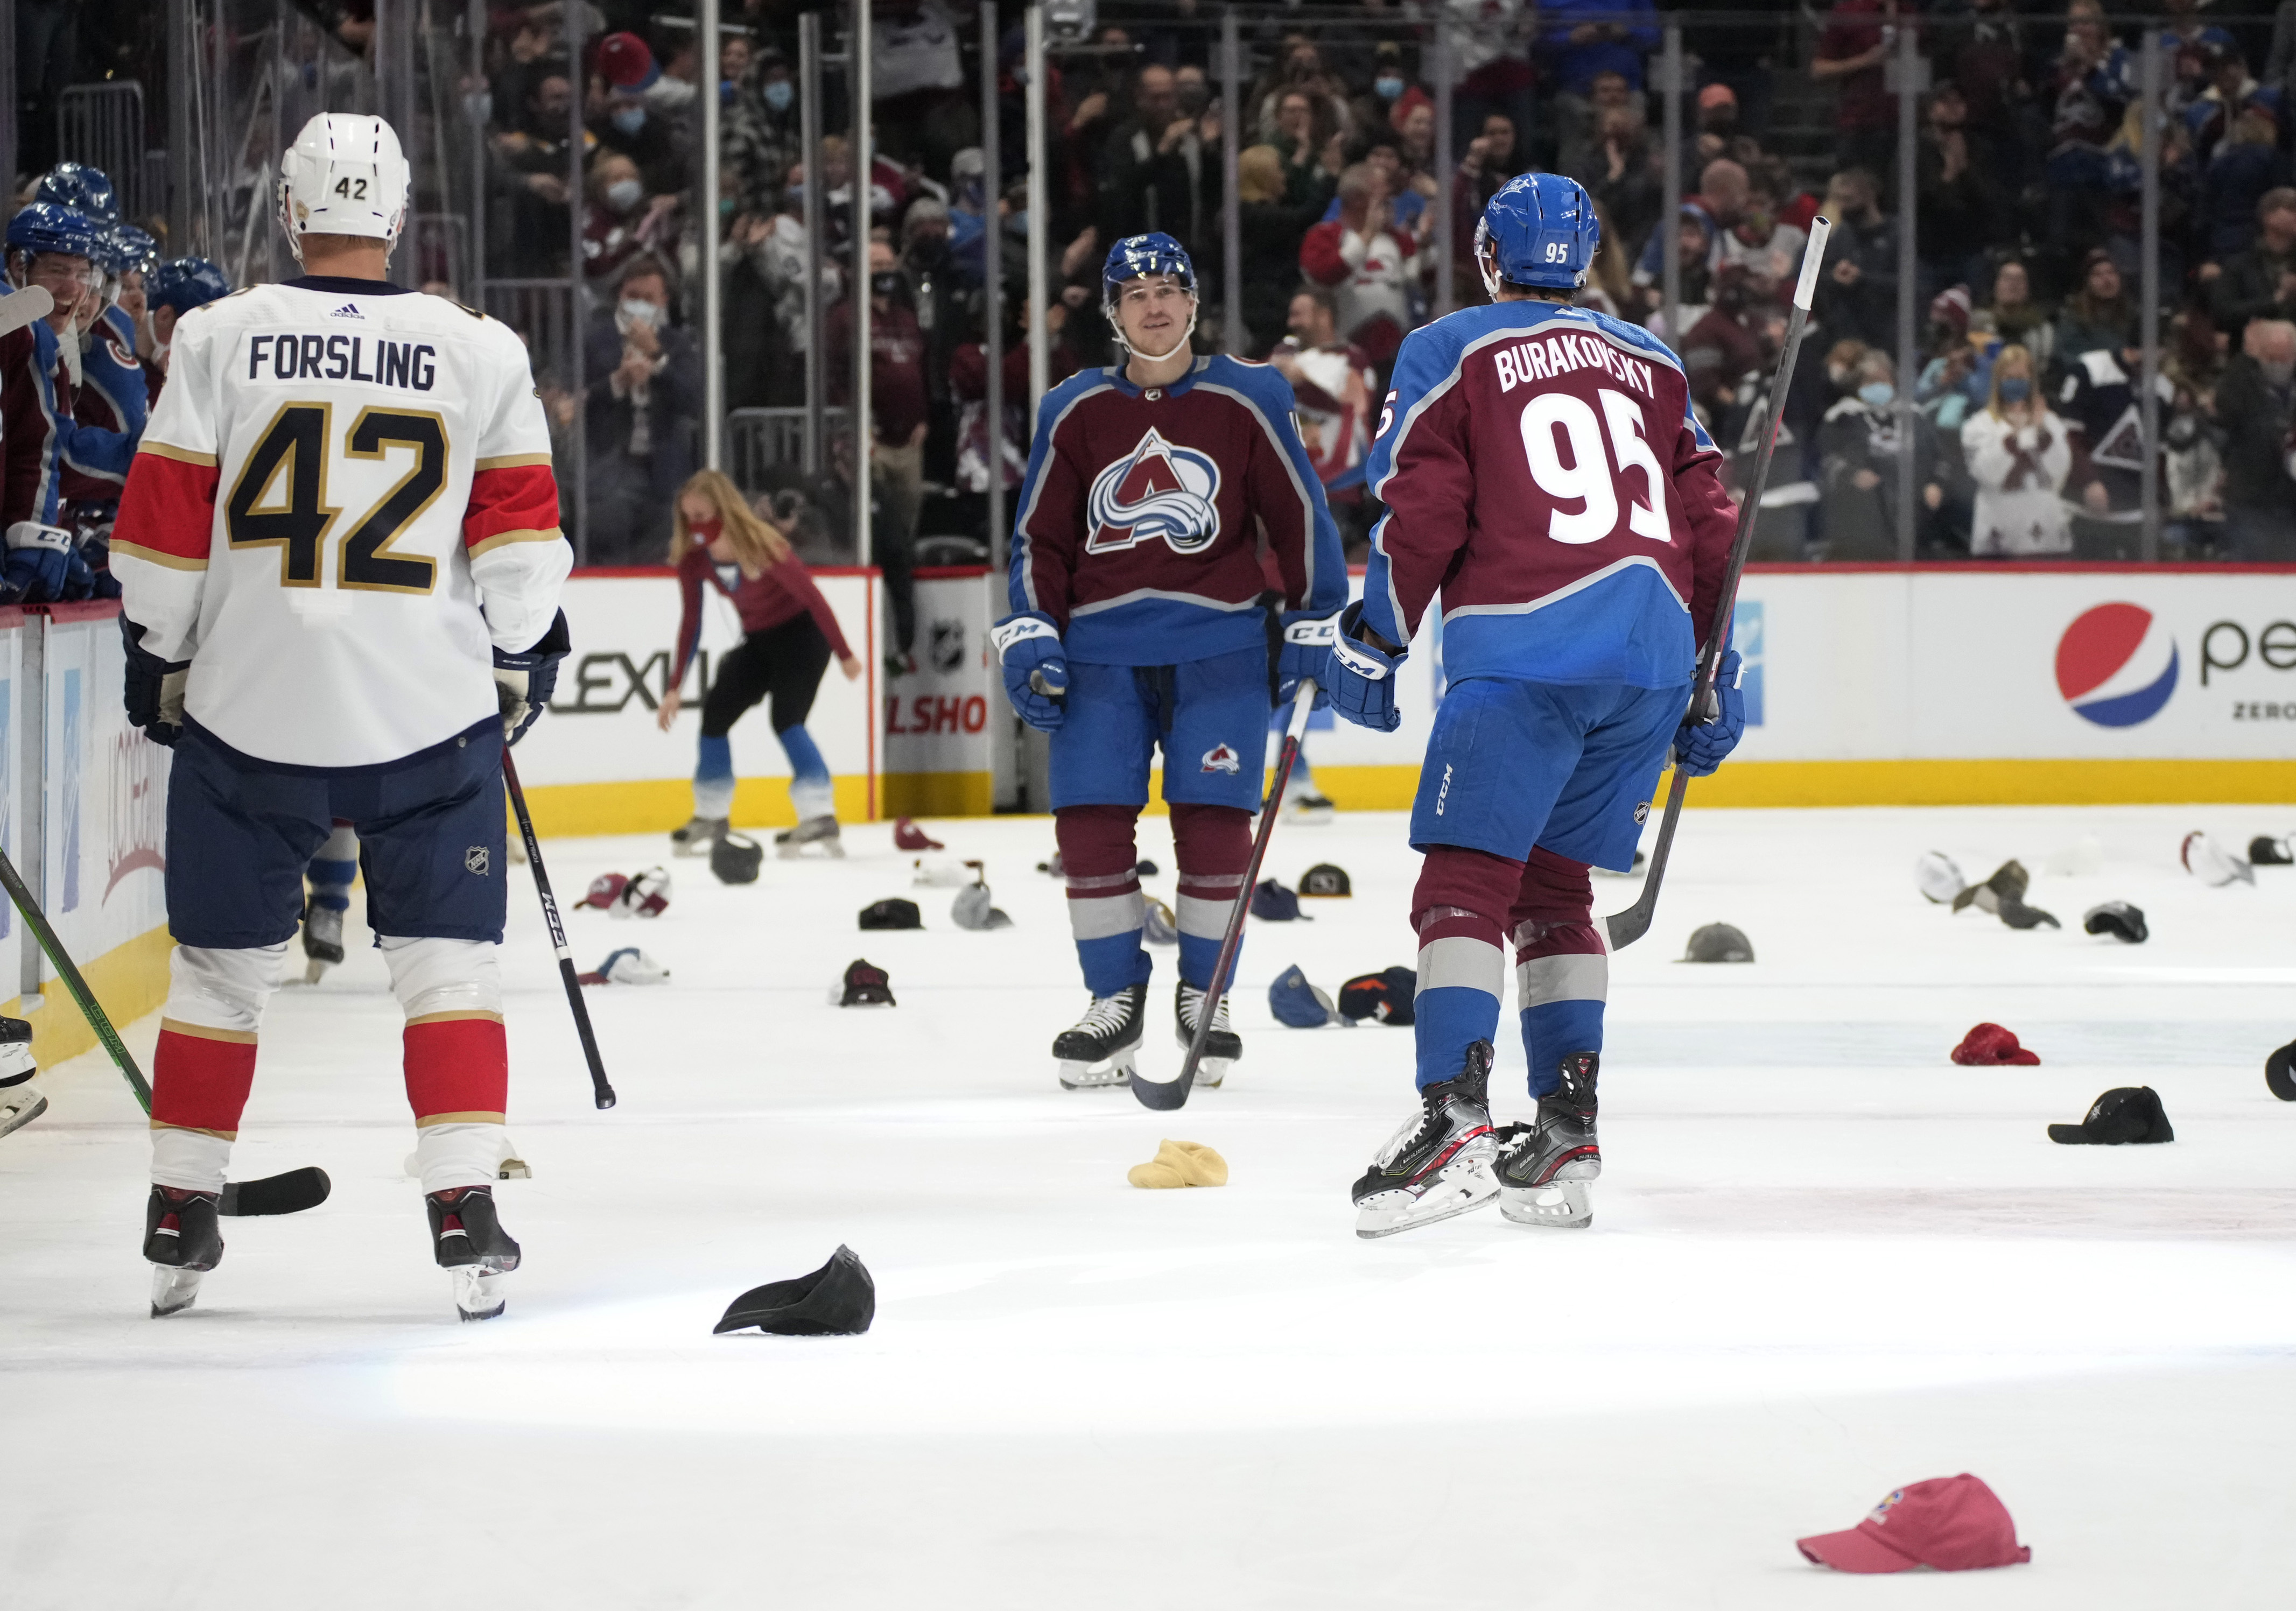 Rantanen's hat trick gives Avalanche win at New Jersey to begin second half